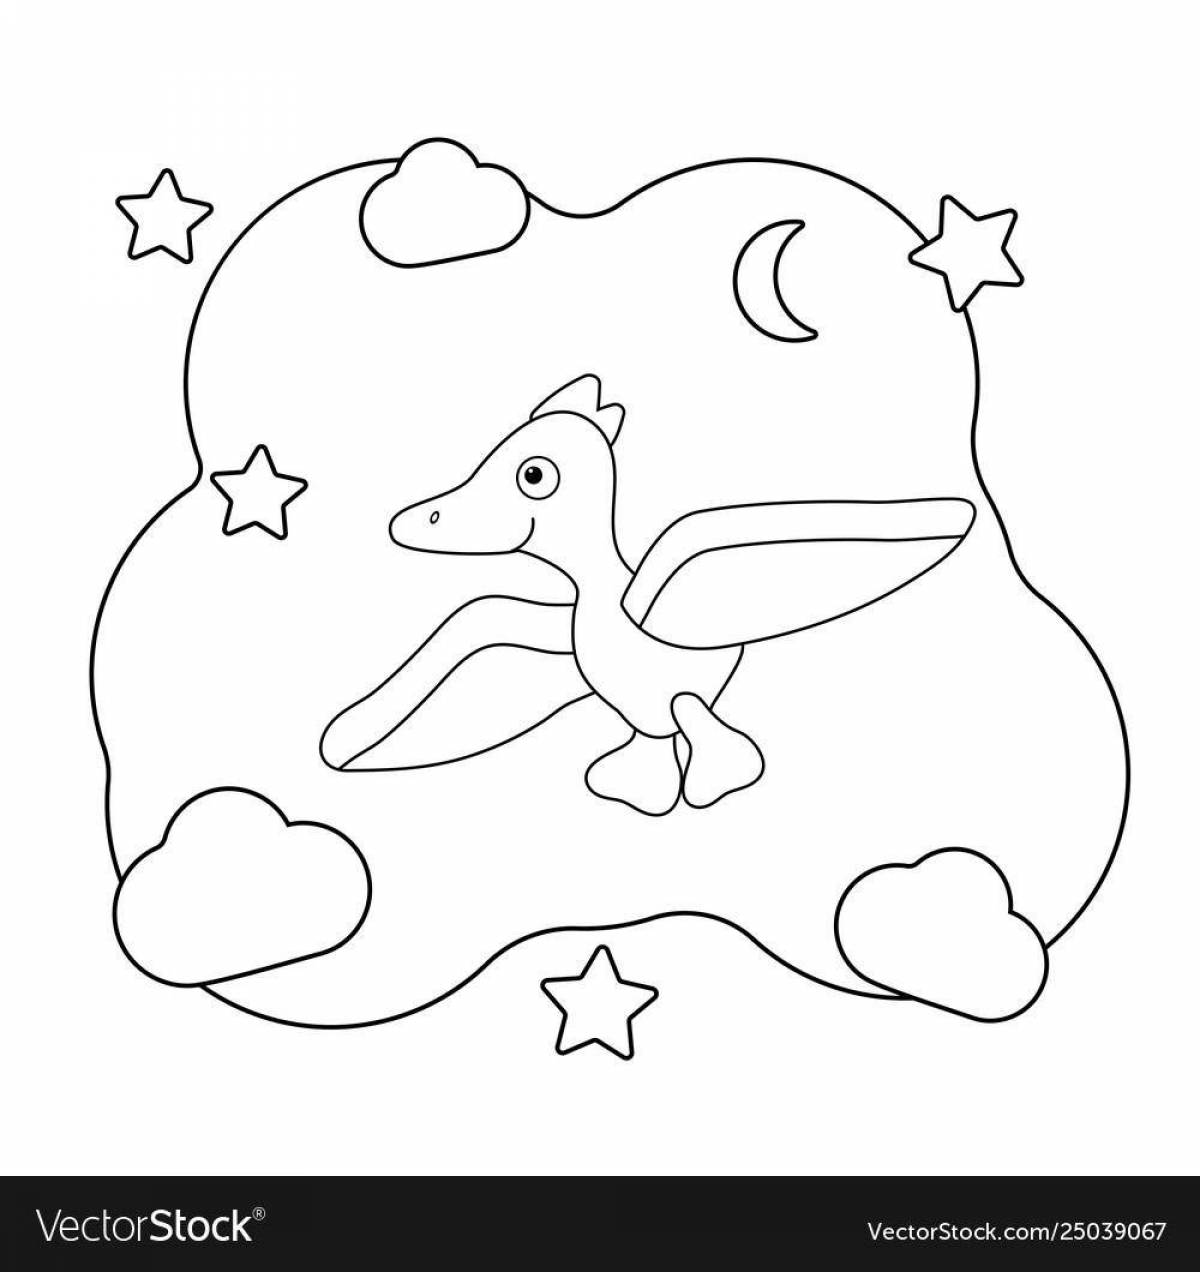 Living dinosaur plant coloring page